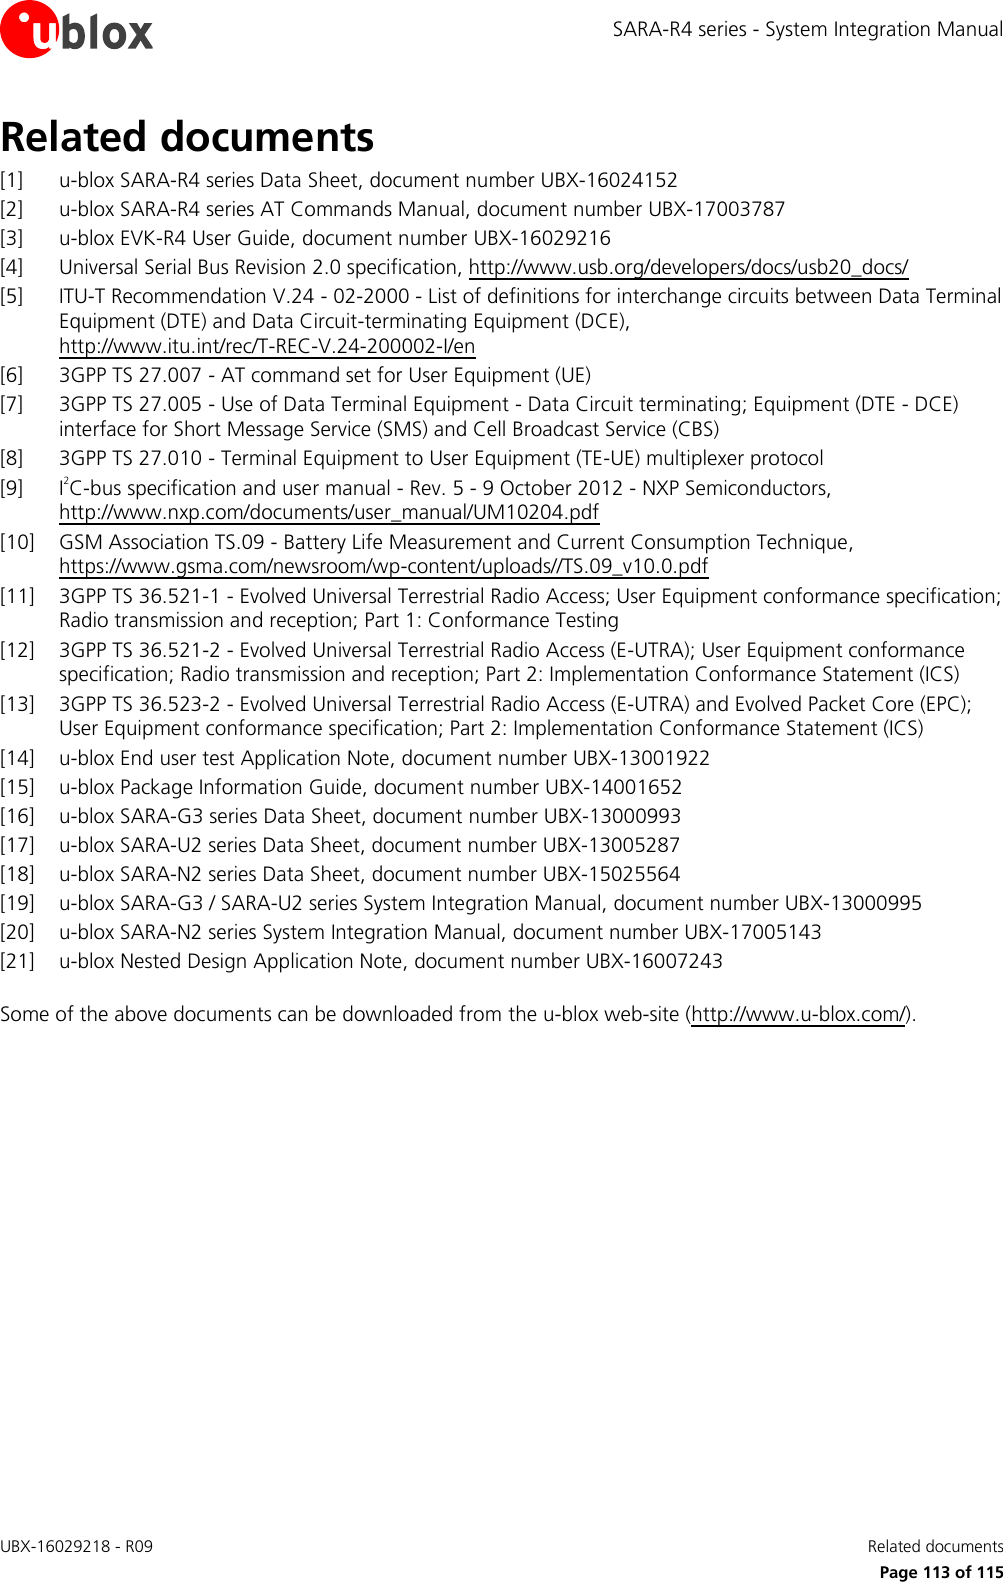 SARA-R4 series - System Integration Manual UBX-16029218 - R09    Related documents      Page 113 of 115 Related documents [1] u-blox SARA-R4 series Data Sheet, document number UBX-16024152 [2] u-blox SARA-R4 series AT Commands Manual, document number UBX-17003787 [3] u-blox EVK-R4 User Guide, document number UBX-16029216 [4] Universal Serial Bus Revision 2.0 specification, http://www.usb.org/developers/docs/usb20_docs/  [5] ITU-T Recommendation V.24 - 02-2000 - List of definitions for interchange circuits between Data Terminal Equipment (DTE) and Data Circuit-terminating Equipment (DCE),  http://www.itu.int/rec/T-REC-V.24-200002-I/en [6] 3GPP TS 27.007 - AT command set for User Equipment (UE)  [7] 3GPP TS 27.005 - Use of Data Terminal Equipment - Data Circuit terminating; Equipment (DTE - DCE) interface for Short Message Service (SMS) and Cell Broadcast Service (CBS)  [8] 3GPP TS 27.010 - Terminal Equipment to User Equipment (TE-UE) multiplexer protocol [9] I2C-bus specification and user manual - Rev. 5 - 9 October 2012 - NXP Semiconductors, http://www.nxp.com/documents/user_manual/UM10204.pdf [10] GSM Association TS.09 - Battery Life Measurement and Current Consumption Technique, https://www.gsma.com/newsroom/wp-content/uploads//TS.09_v10.0.pdf  [11] 3GPP TS 36.521-1 - Evolved Universal Terrestrial Radio Access; User Equipment conformance specification; Radio transmission and reception; Part 1: Conformance Testing [12] 3GPP TS 36.521-2 - Evolved Universal Terrestrial Radio Access (E-UTRA); User Equipment conformance specification; Radio transmission and reception; Part 2: Implementation Conformance Statement (ICS) [13] 3GPP TS 36.523-2 - Evolved Universal Terrestrial Radio Access (E-UTRA) and Evolved Packet Core (EPC); User Equipment conformance specification; Part 2: Implementation Conformance Statement (ICS) [14] u-blox End user test Application Note, document number UBX-13001922 [15] u-blox Package Information Guide, document number UBX-14001652 [16] u-blox SARA-G3 series Data Sheet, document number UBX-13000993 [17] u-blox SARA-U2 series Data Sheet, document number UBX-13005287 [18] u-blox SARA-N2 series Data Sheet, document number UBX-15025564 [19] u-blox SARA-G3 / SARA-U2 series System Integration Manual, document number UBX-13000995 [20] u-blox SARA-N2 series System Integration Manual, document number UBX-17005143 [21] u-blox Nested Design Application Note, document number UBX-16007243  Some of the above documents can be downloaded from the u-blox web-site (http://www.u-blox.com/).  